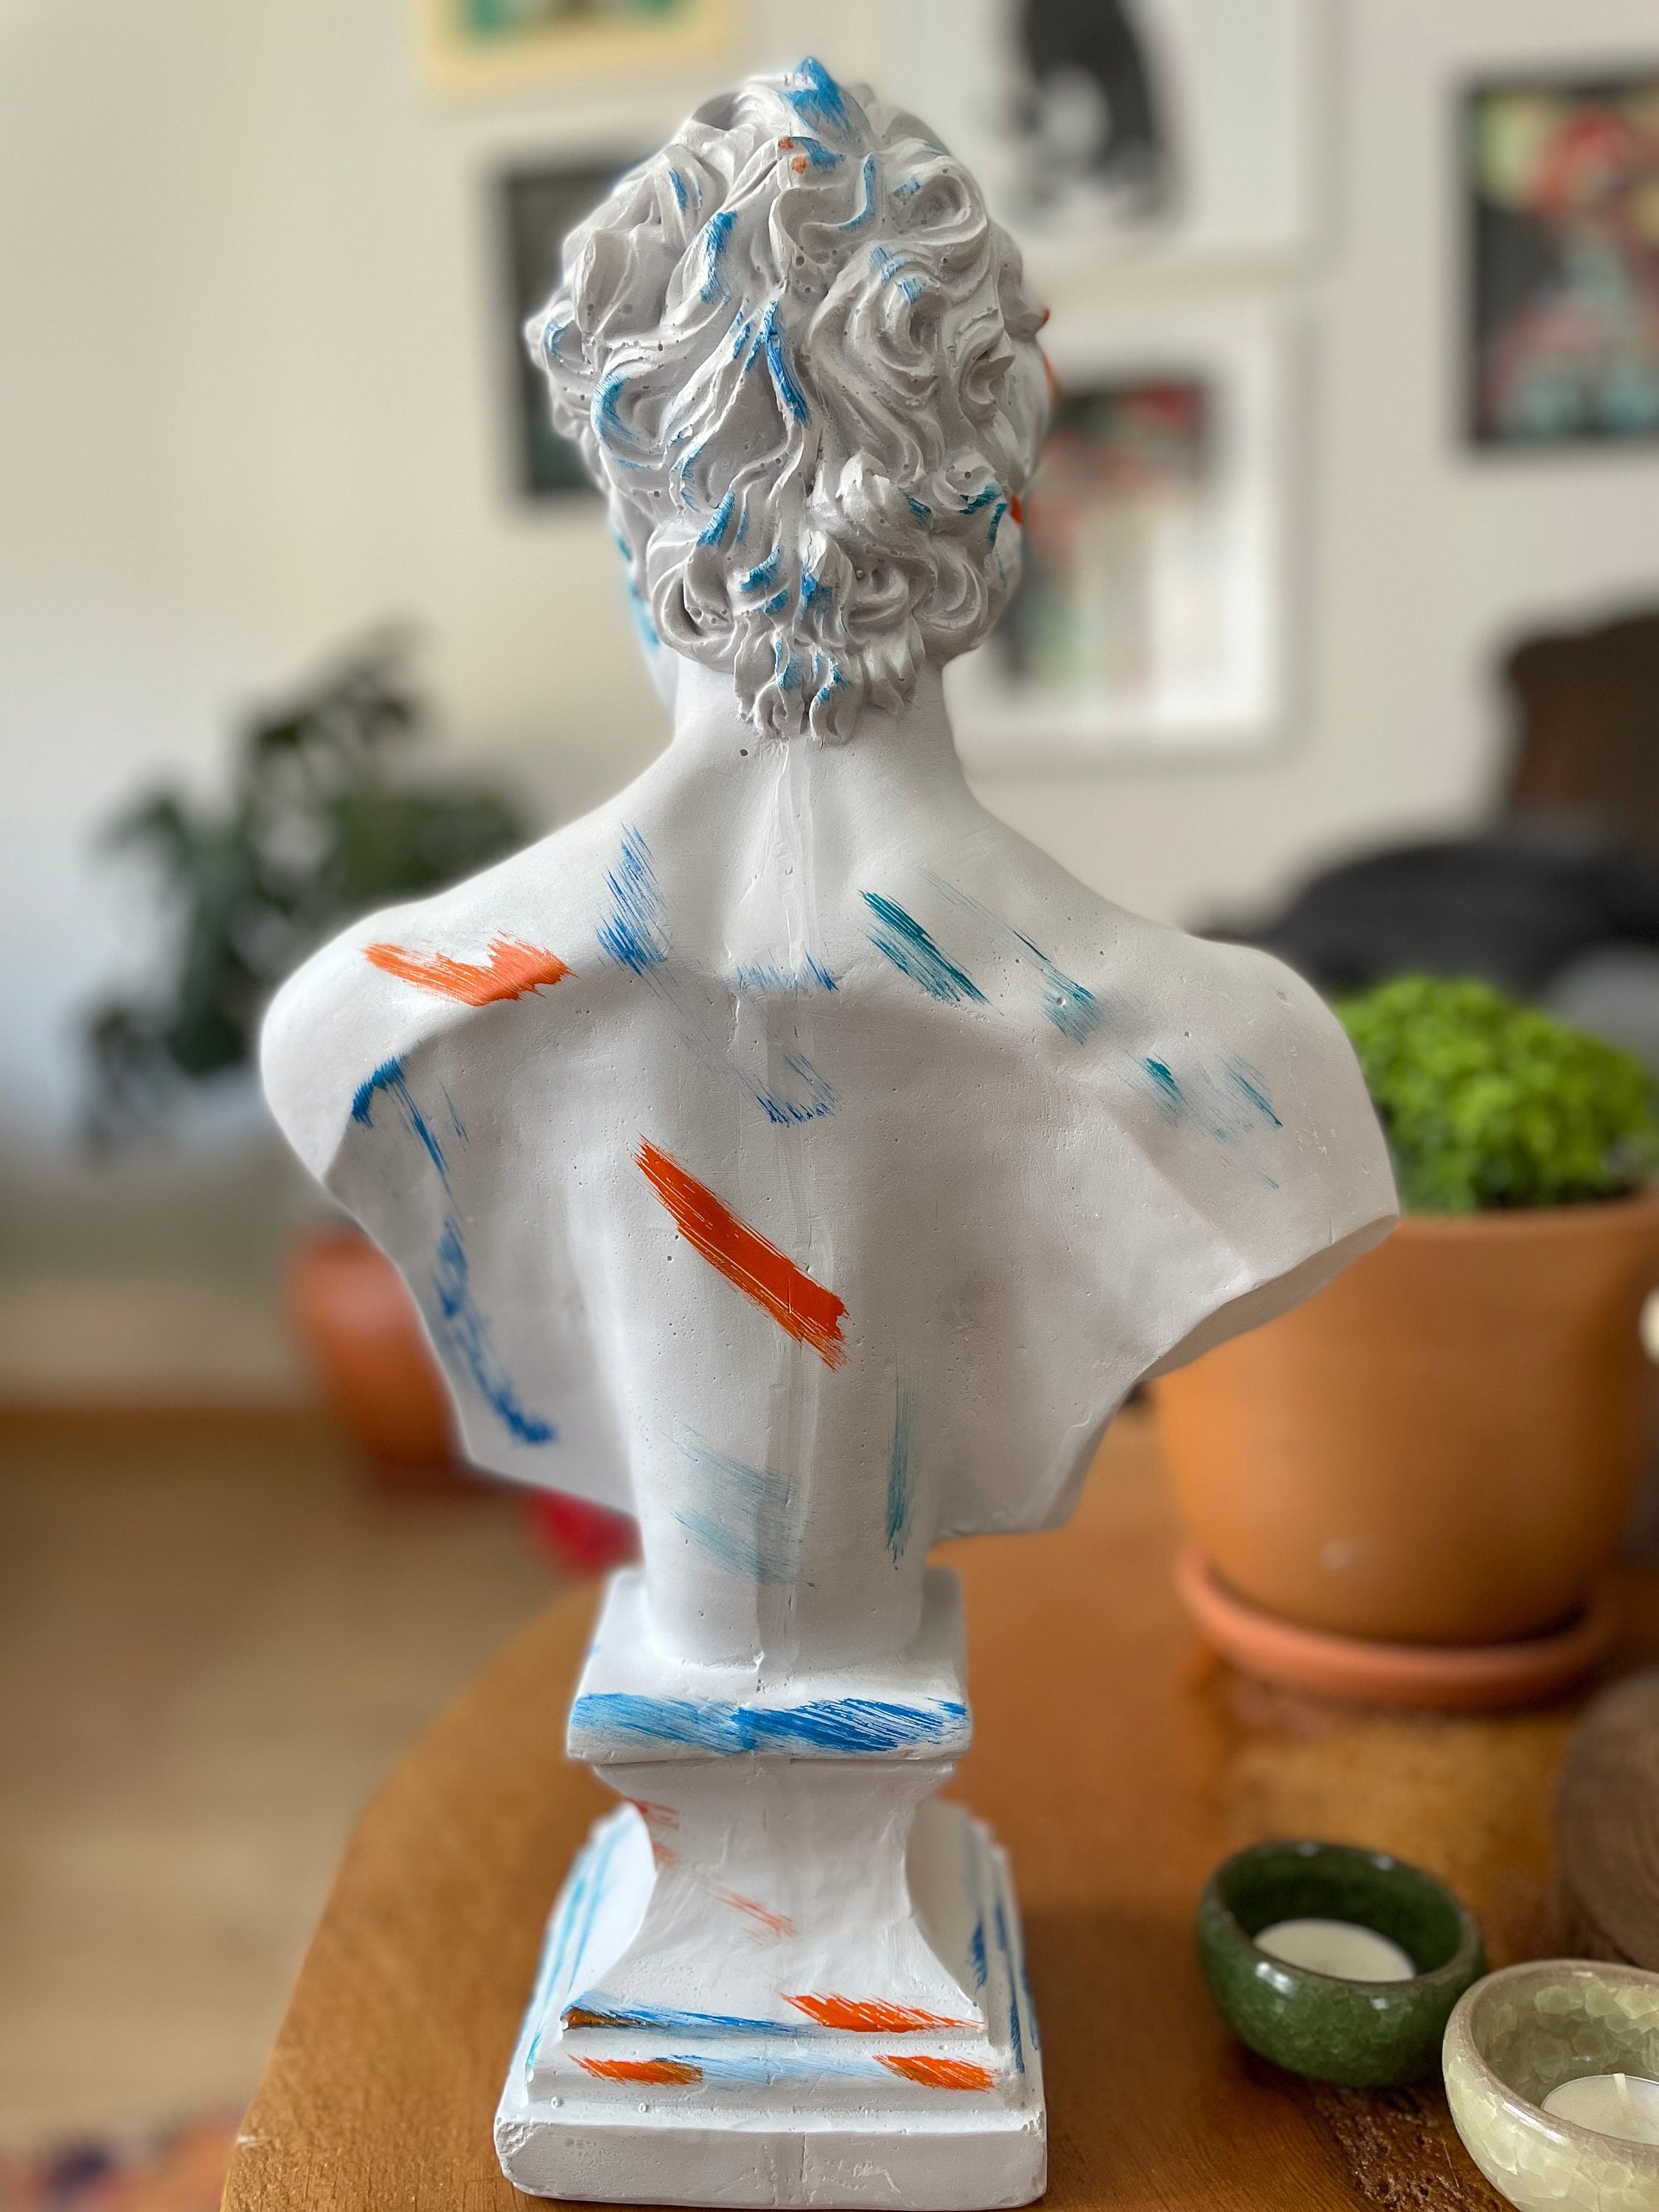 Harmonious Fusion: Large David Bust Sculpture with Colorful Accents